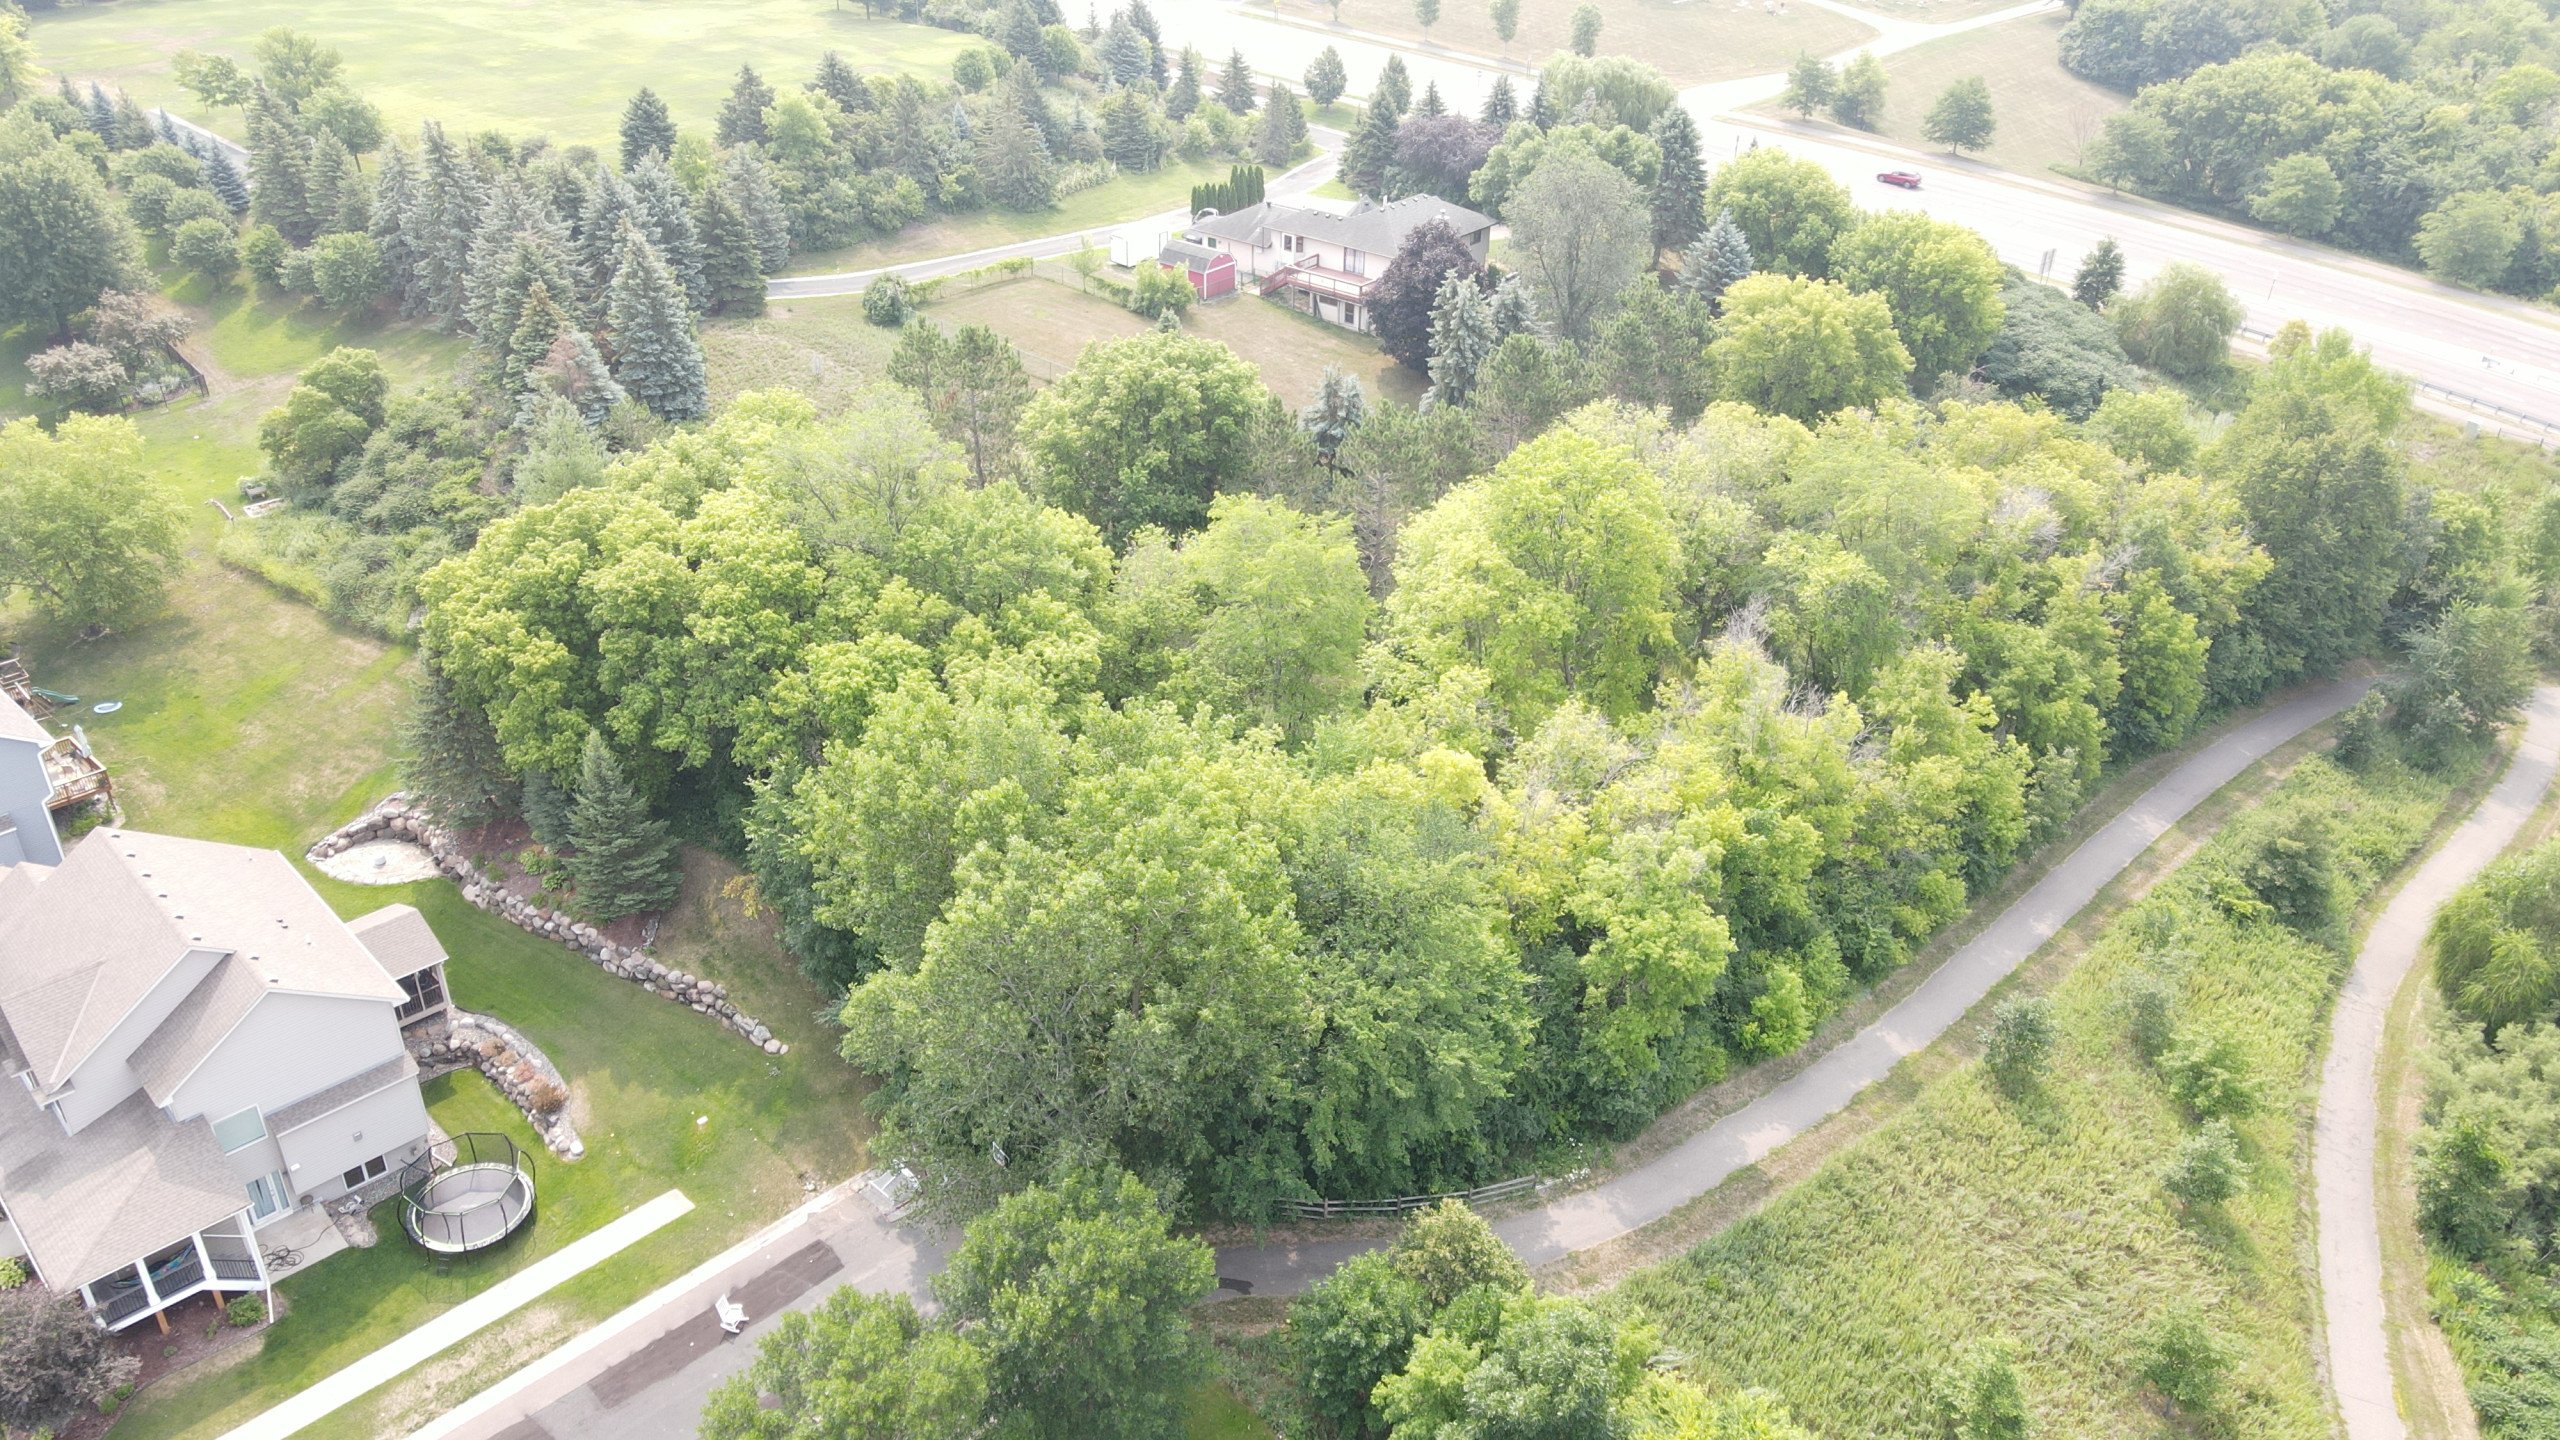 residential-auctions-development-hennepin-county-minnesota-3-acres-listing-number-17026-NW corner looking SE-3.jpg